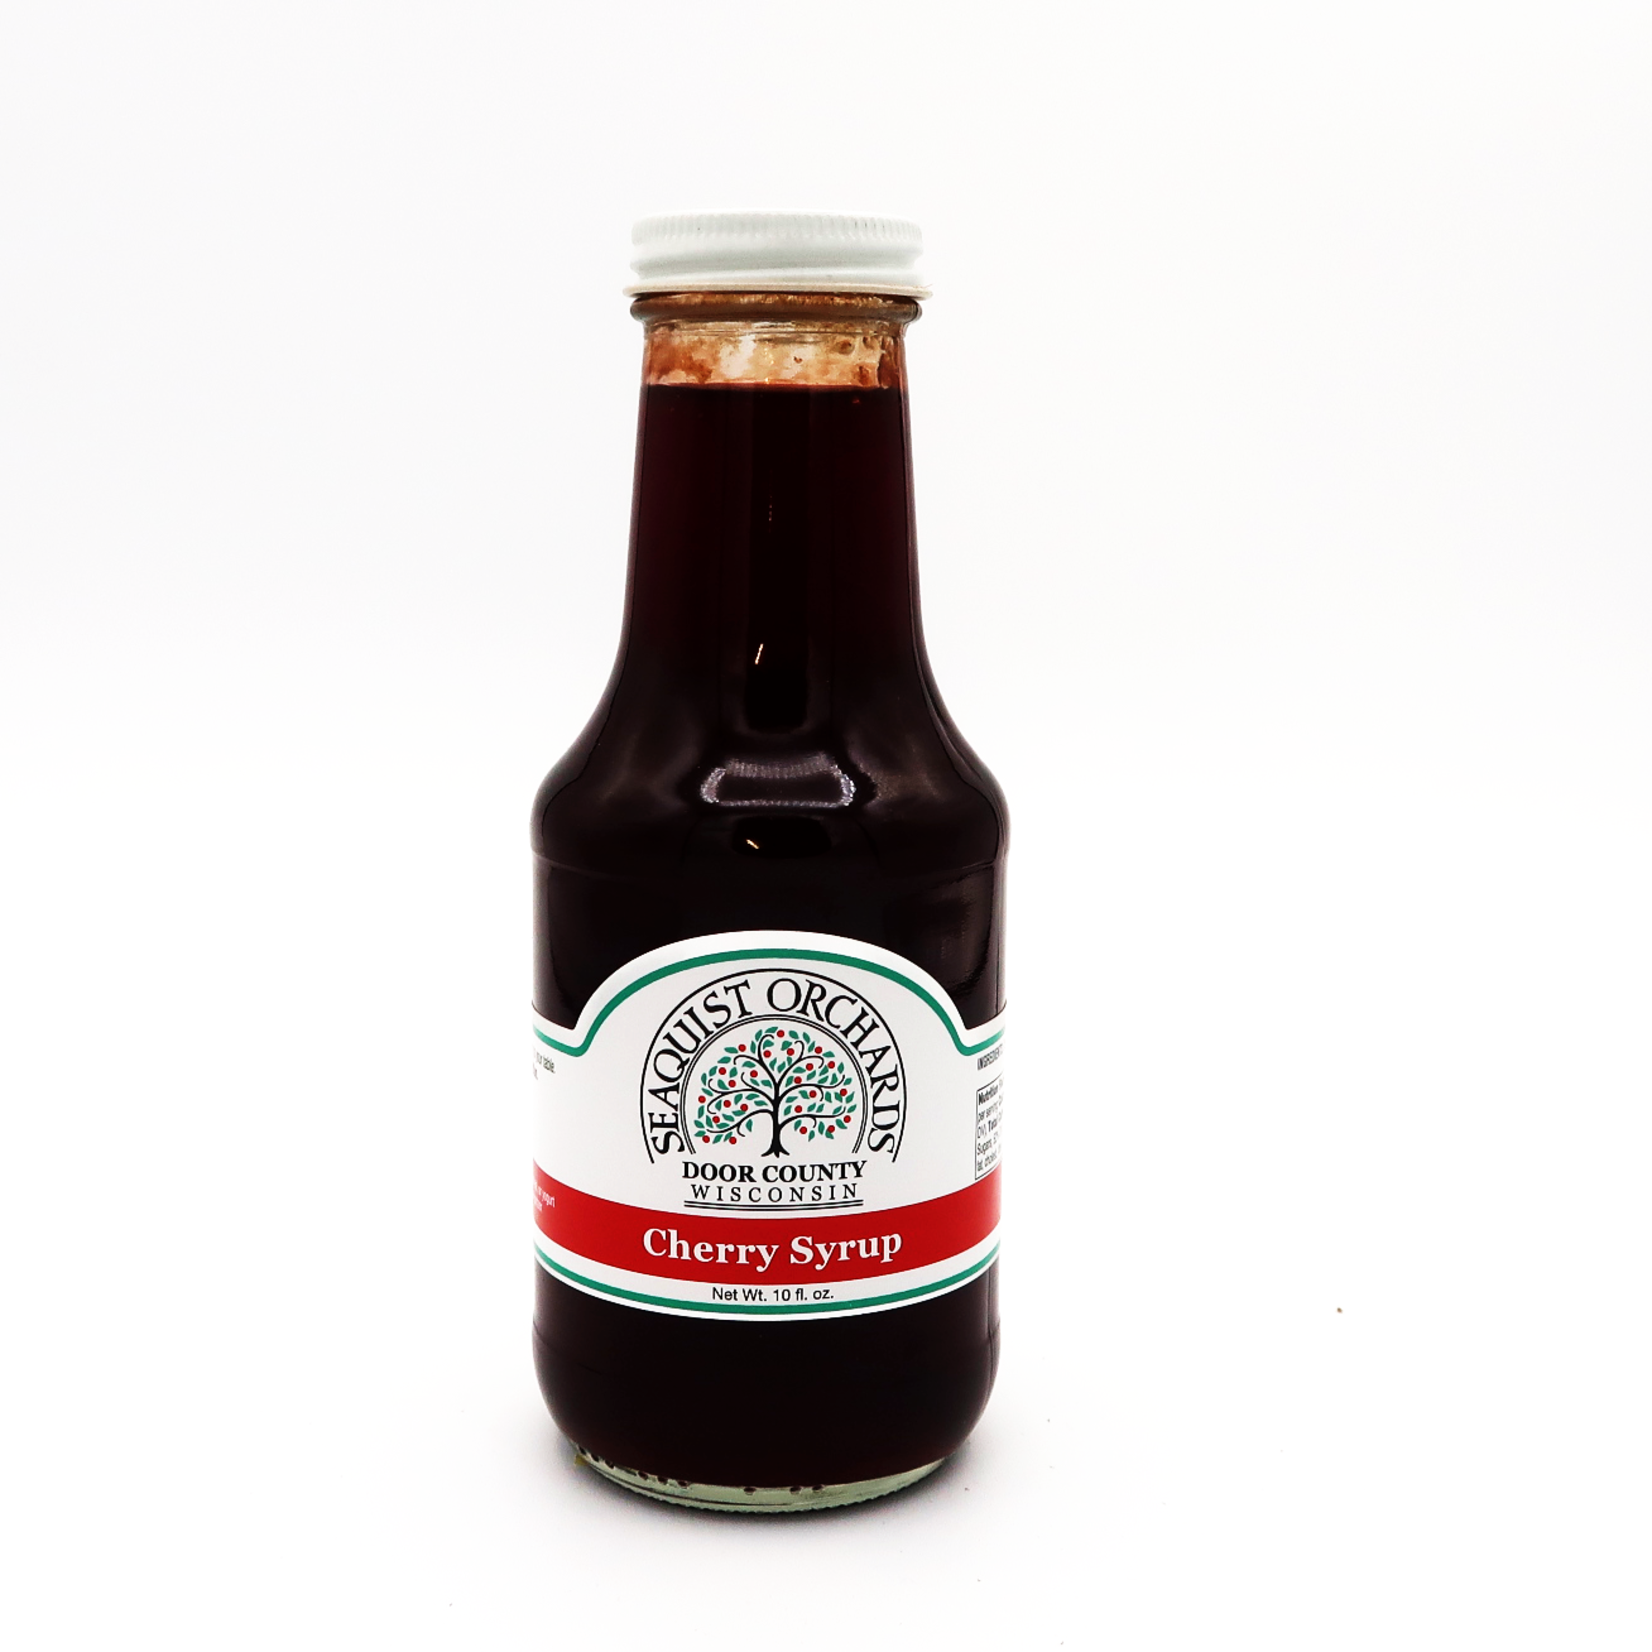 Seaquist Orchards Seaquist Orchard Cherry Syrup